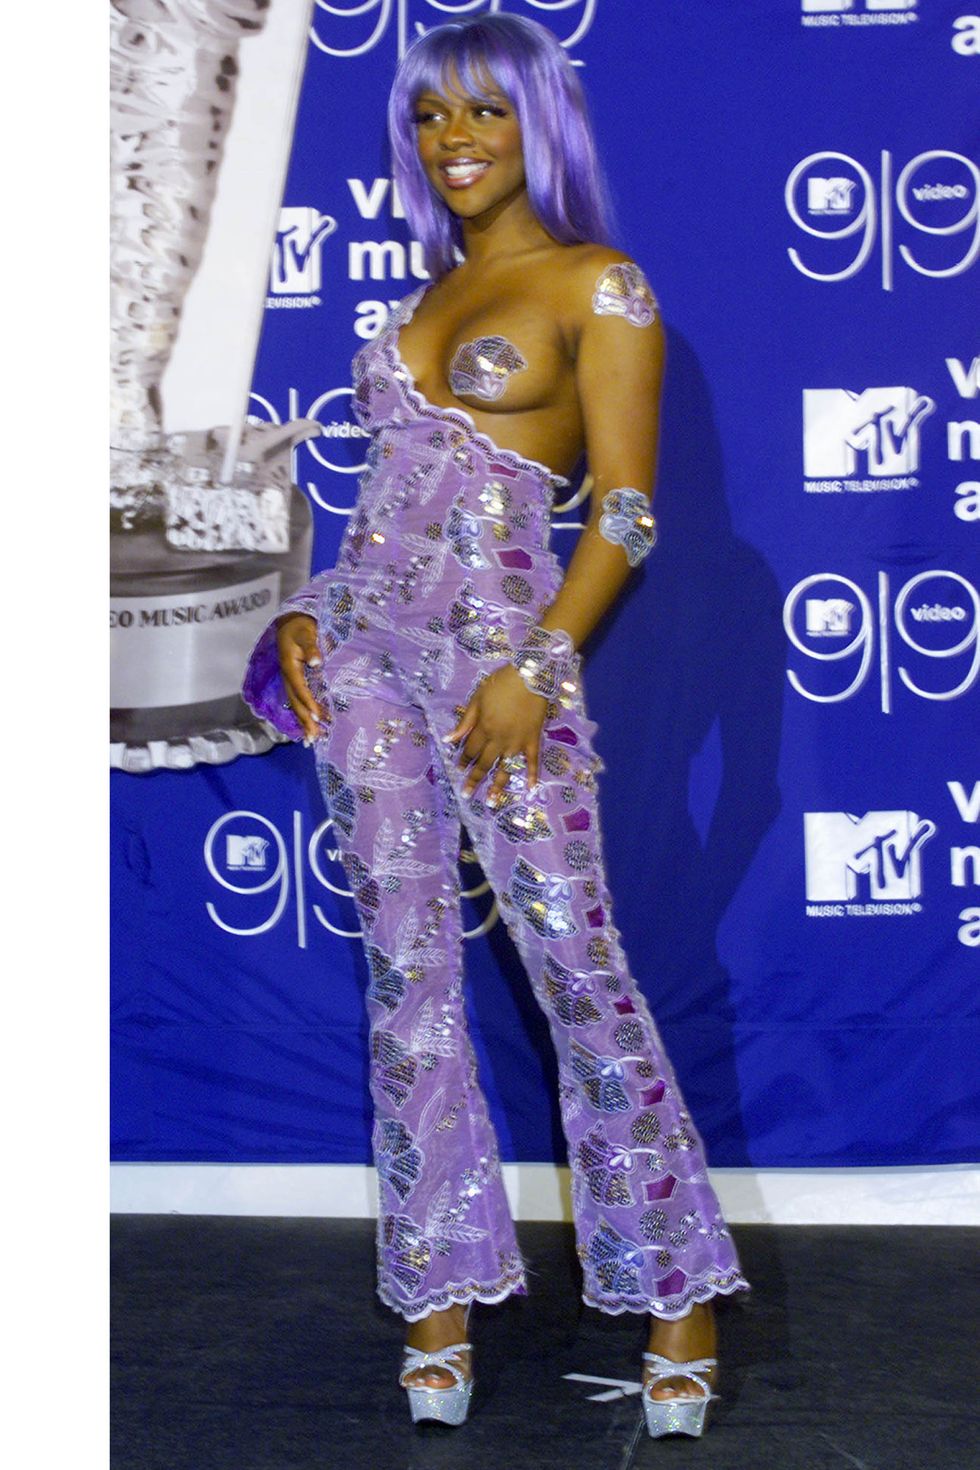 Lil' Kim Media on X: 22 years ago today Lil' Kim attended the MTV Video  Music Awards. She wore one of the most iconic outfits in VMA history, the  purple jumpsuit and